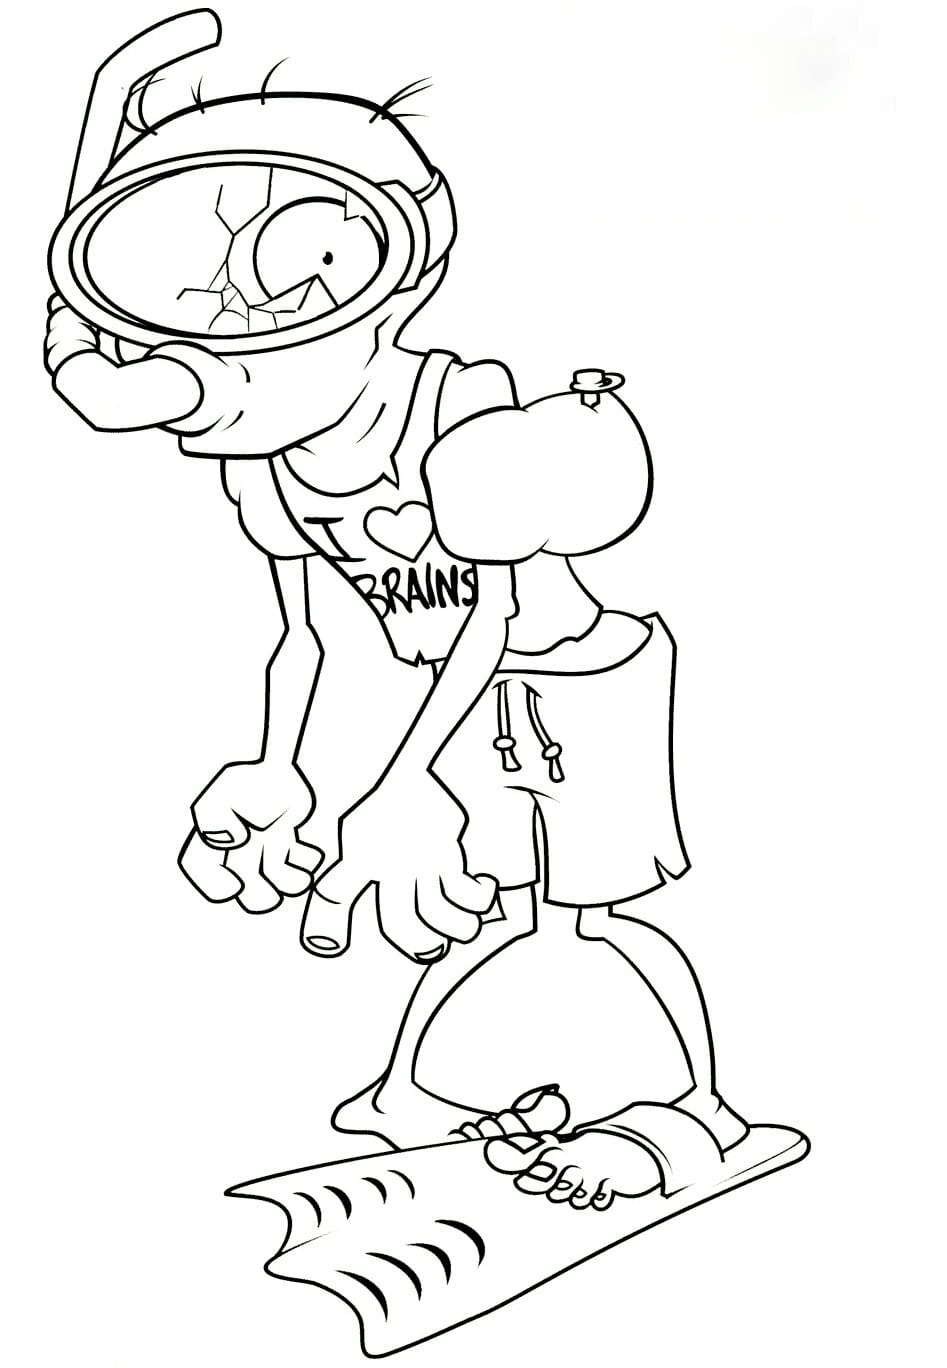 Snorkel Zombie Coloring Pages